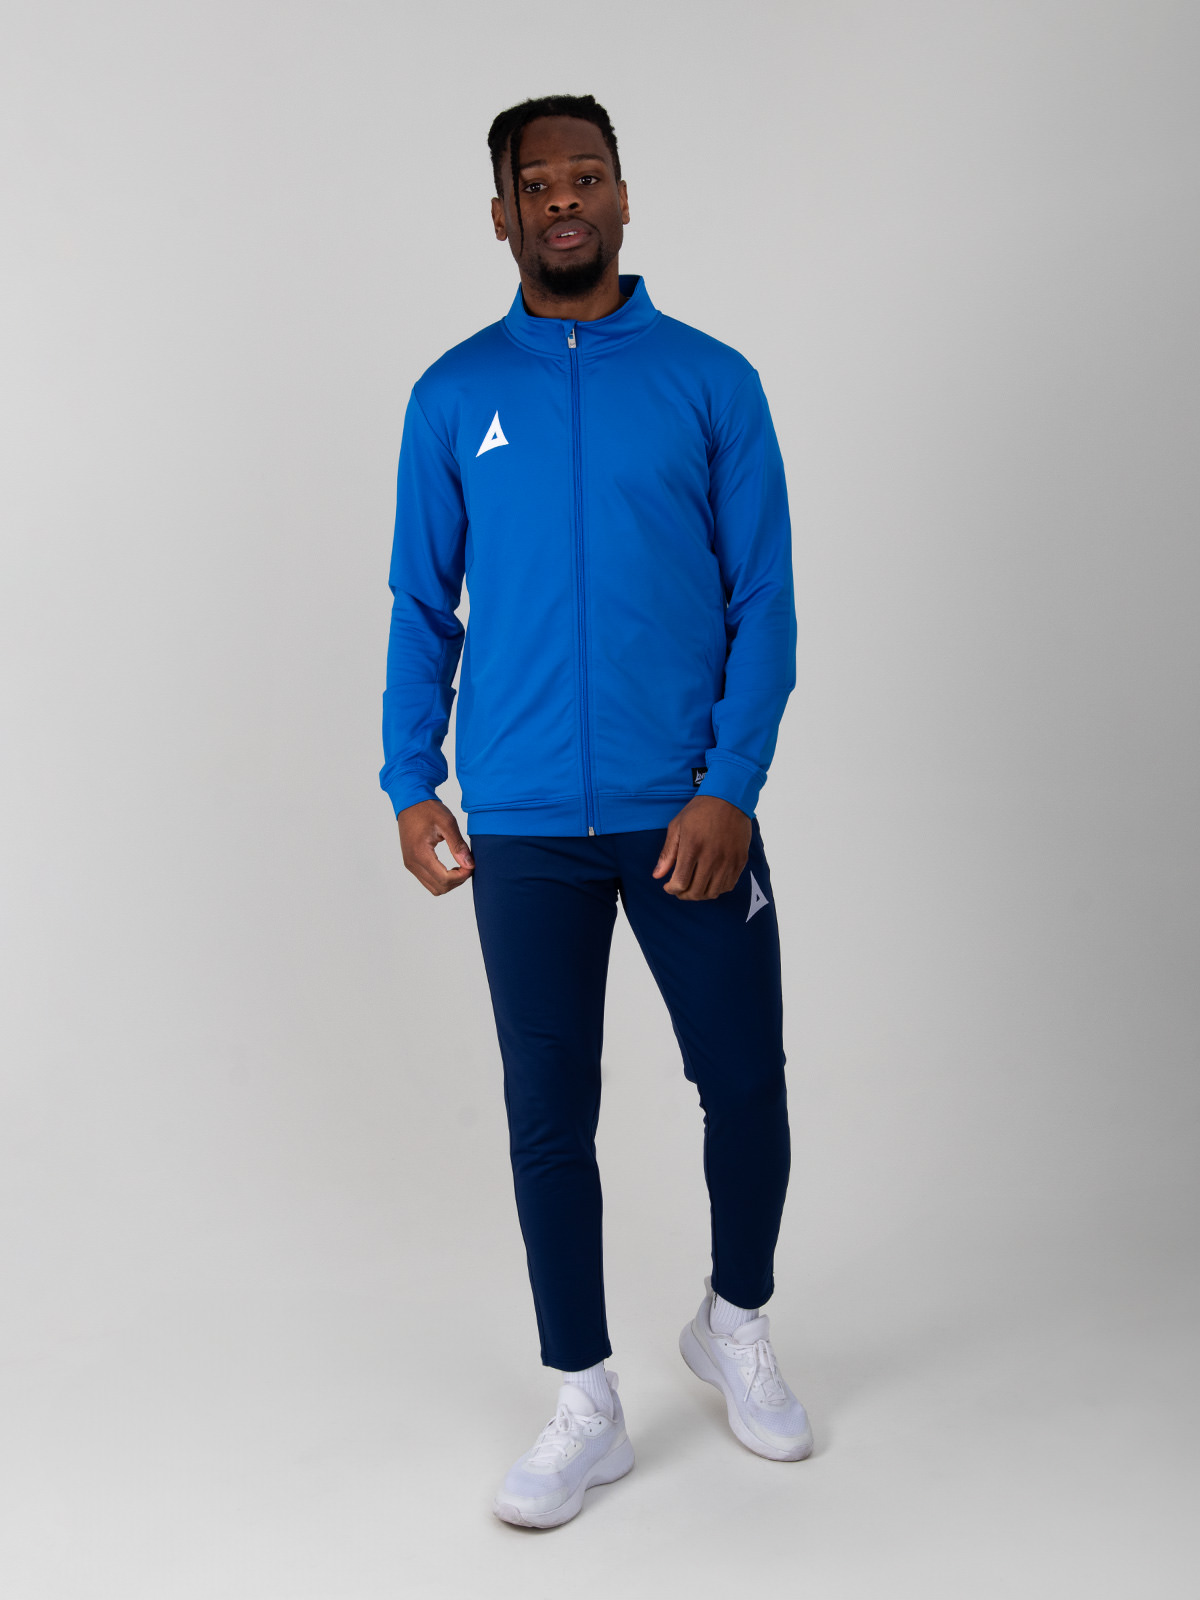 model wearing a royal blue tracksuit jacket with navy tracksuit bottoms.